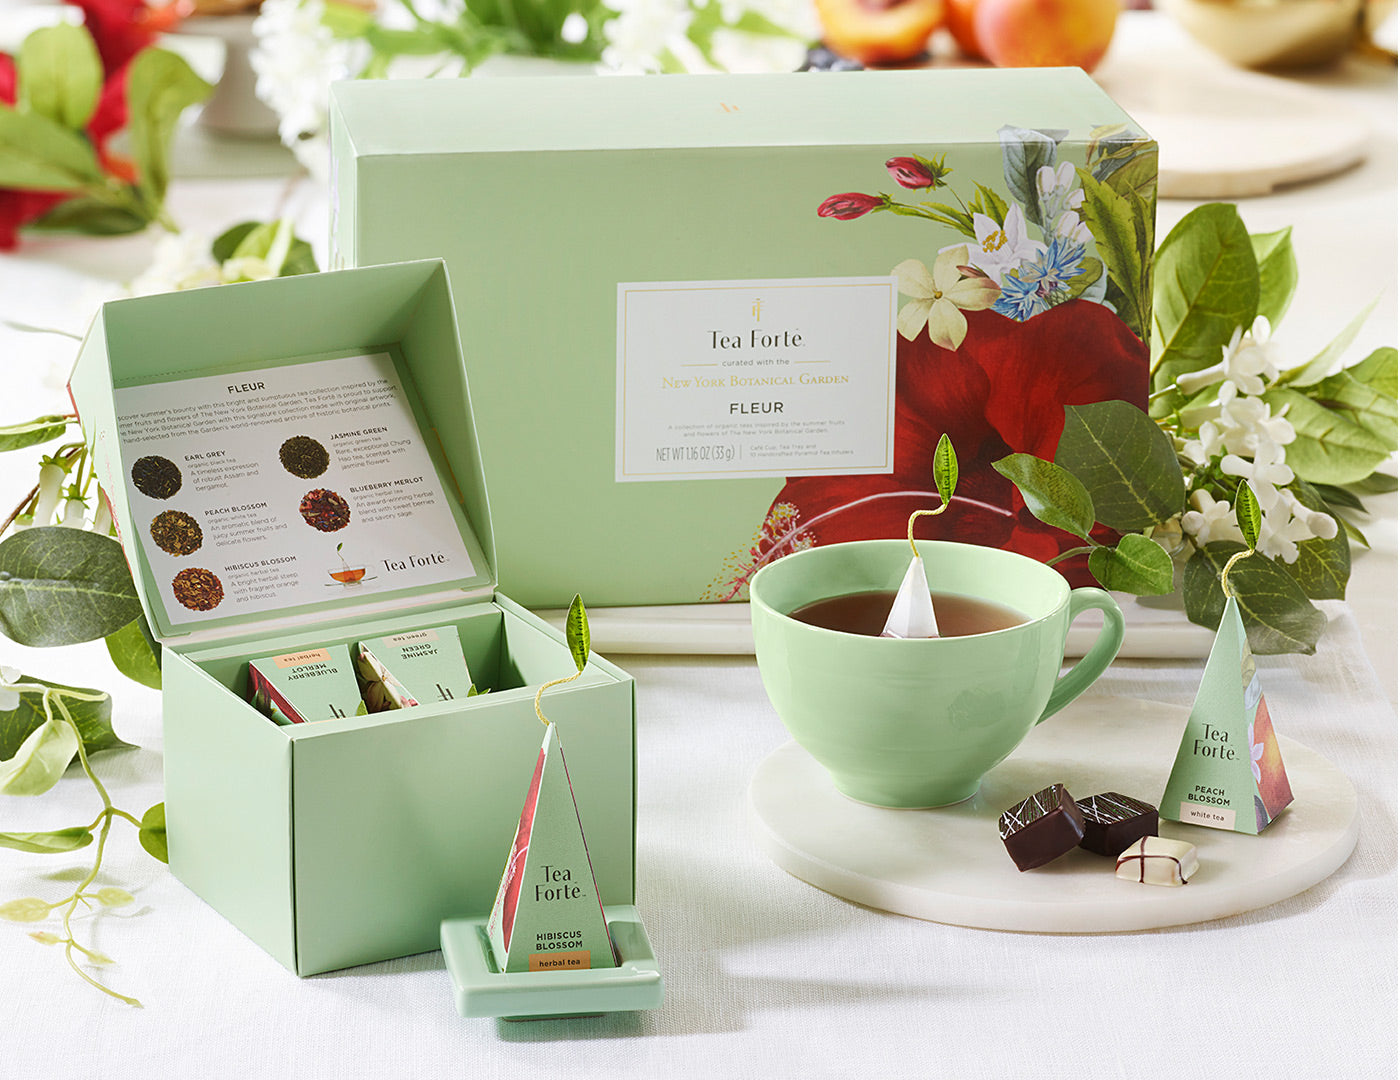 Fleur Collection Gift Set showing contents on table